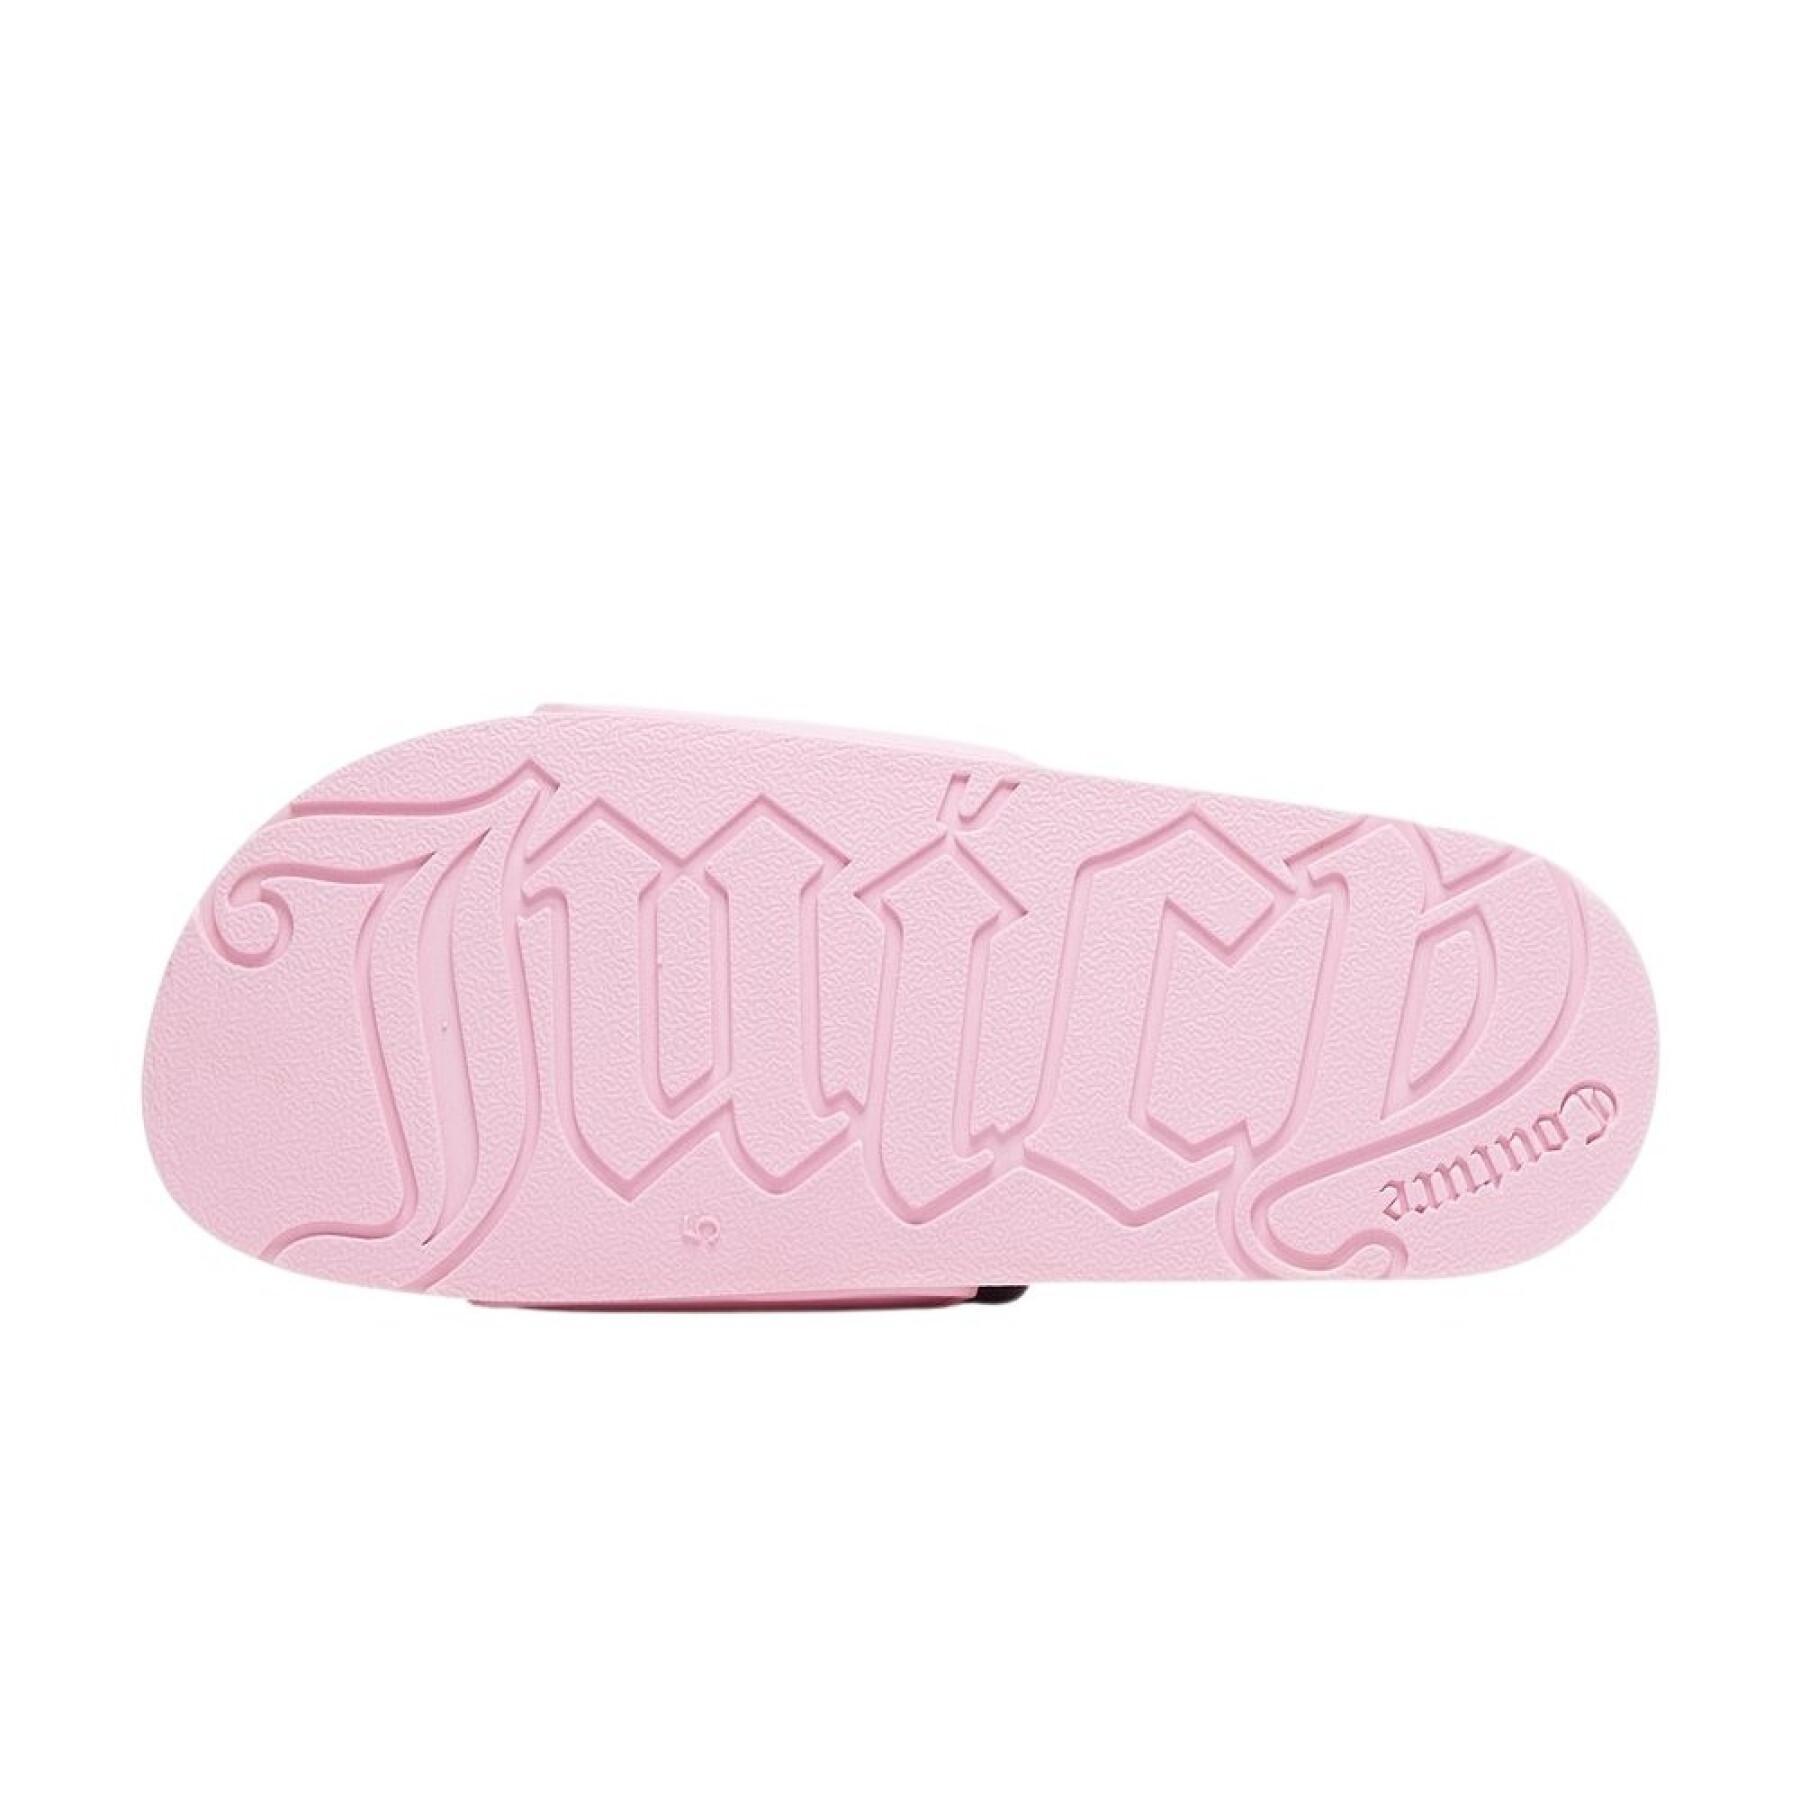 Chanclas de mujer Juicy Couture Embossed